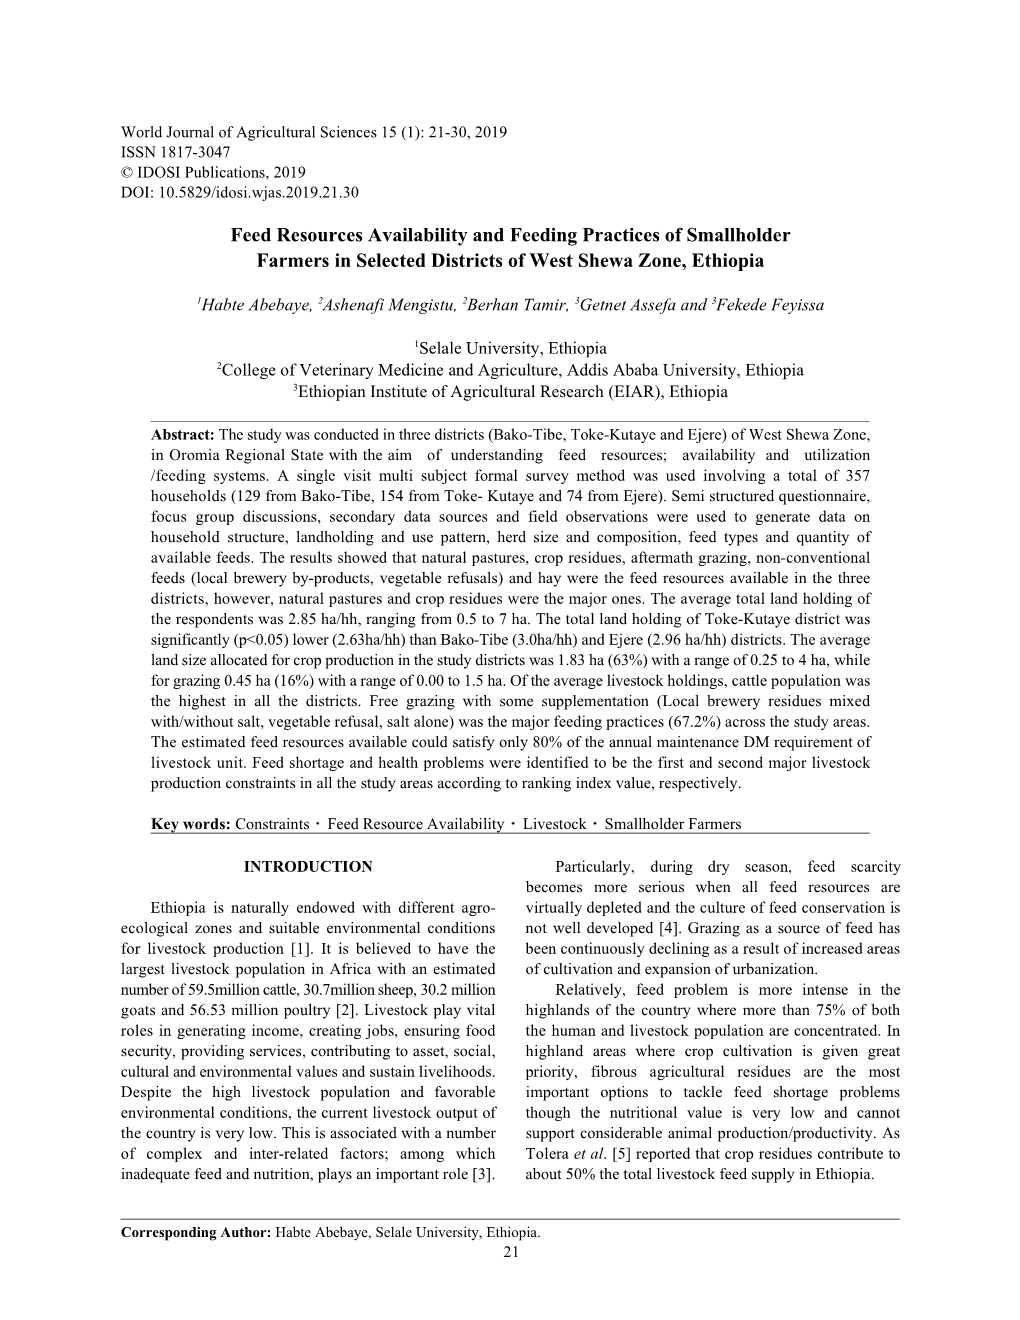 Feed Resources Availability and Feeding Practices of Smallholder Farmers in Selected Districts of West Shewa Zone, Ethiopia